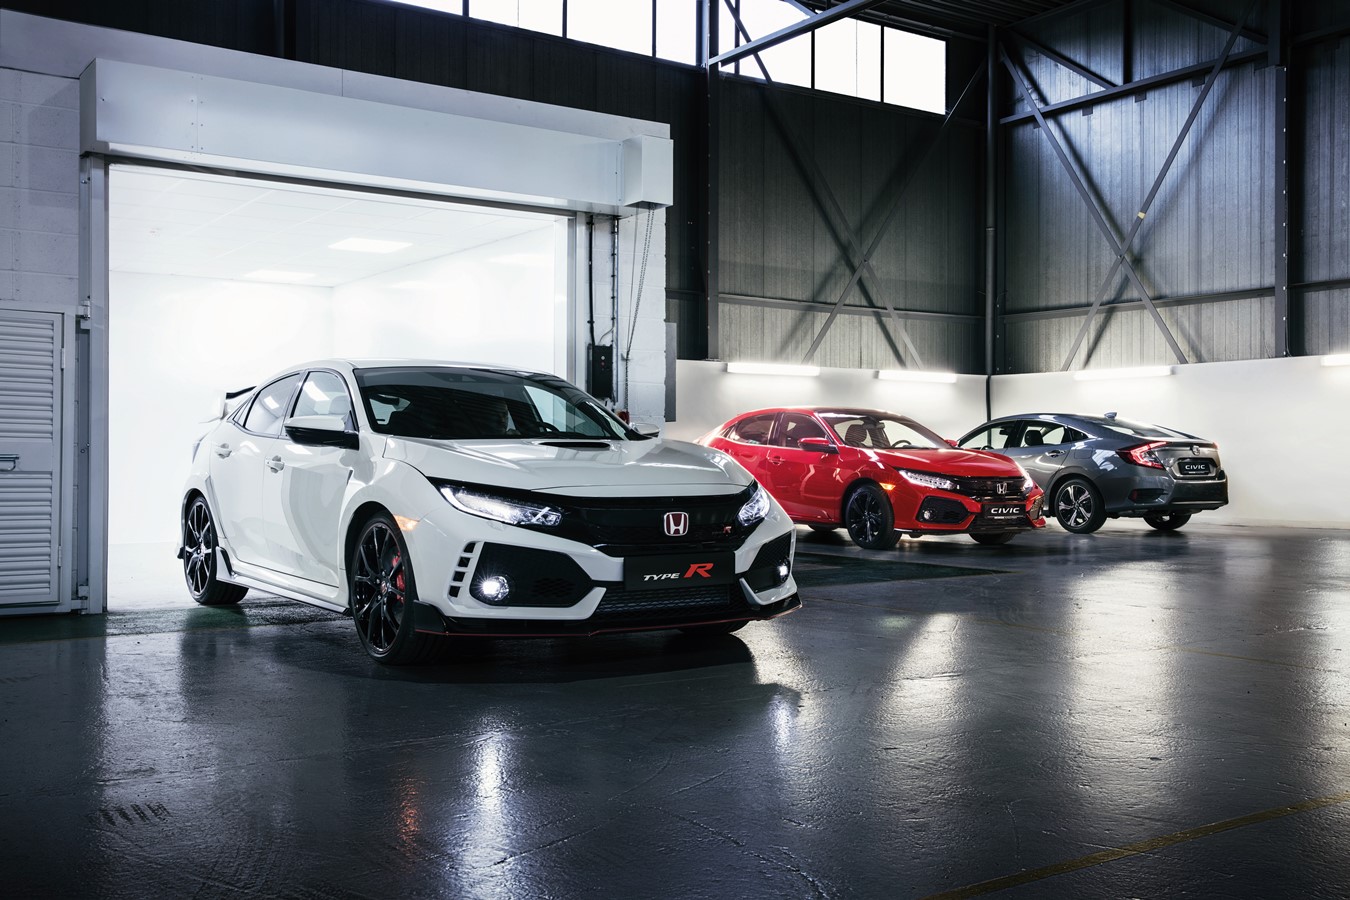 Honda Civic shortlisted for AUTOBEST 2018